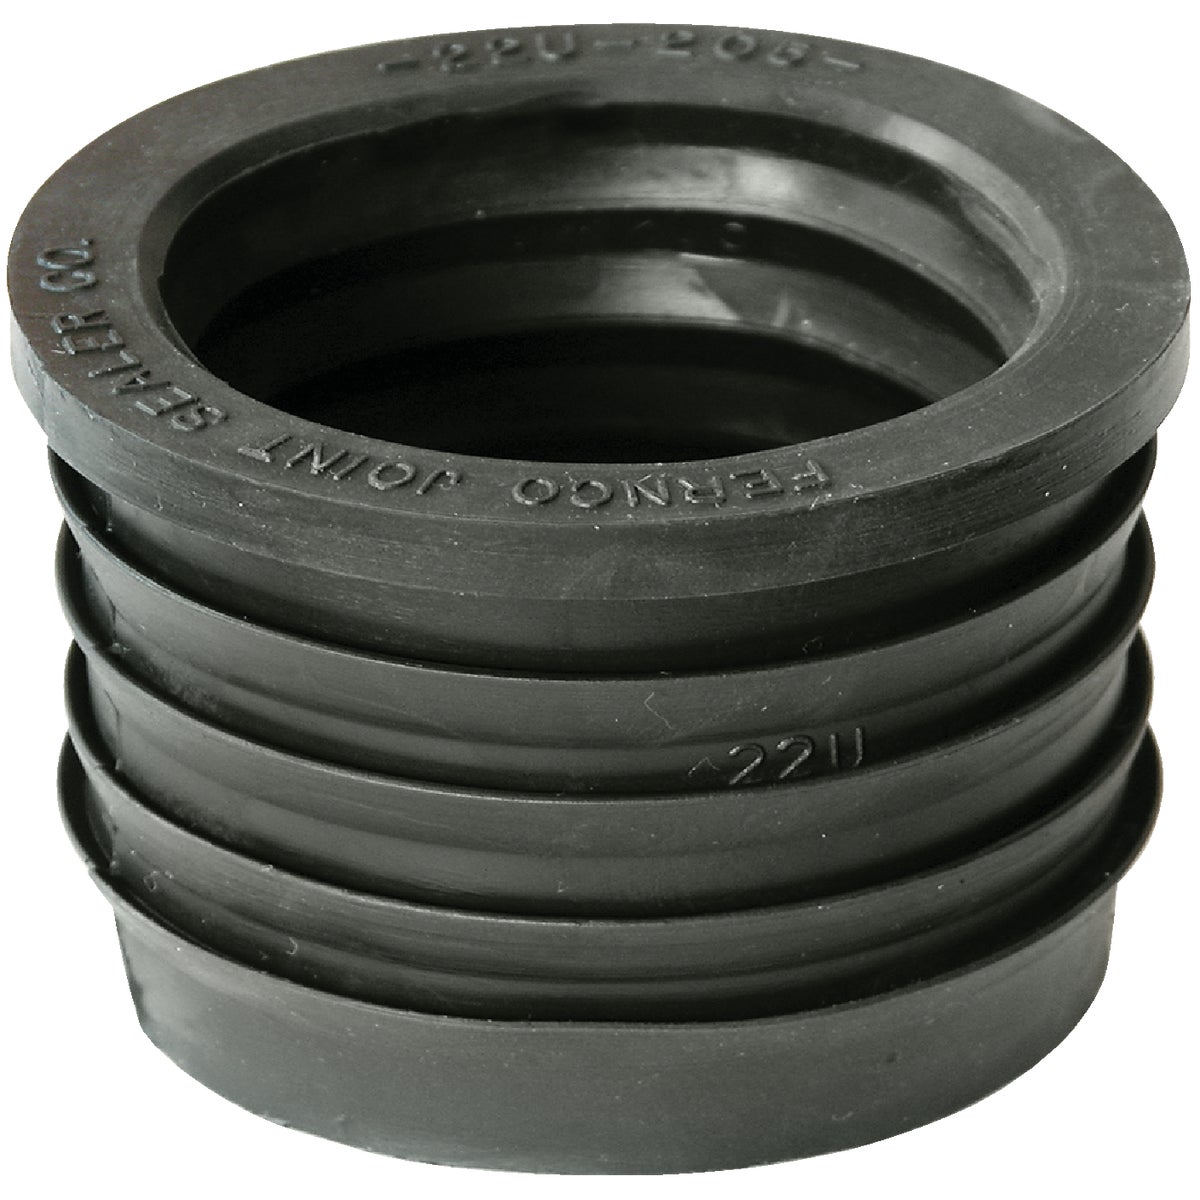 Fernco DWV 2 In. x 2 In. Sewer and Drain PVC Iron Pipe Hub Adapter